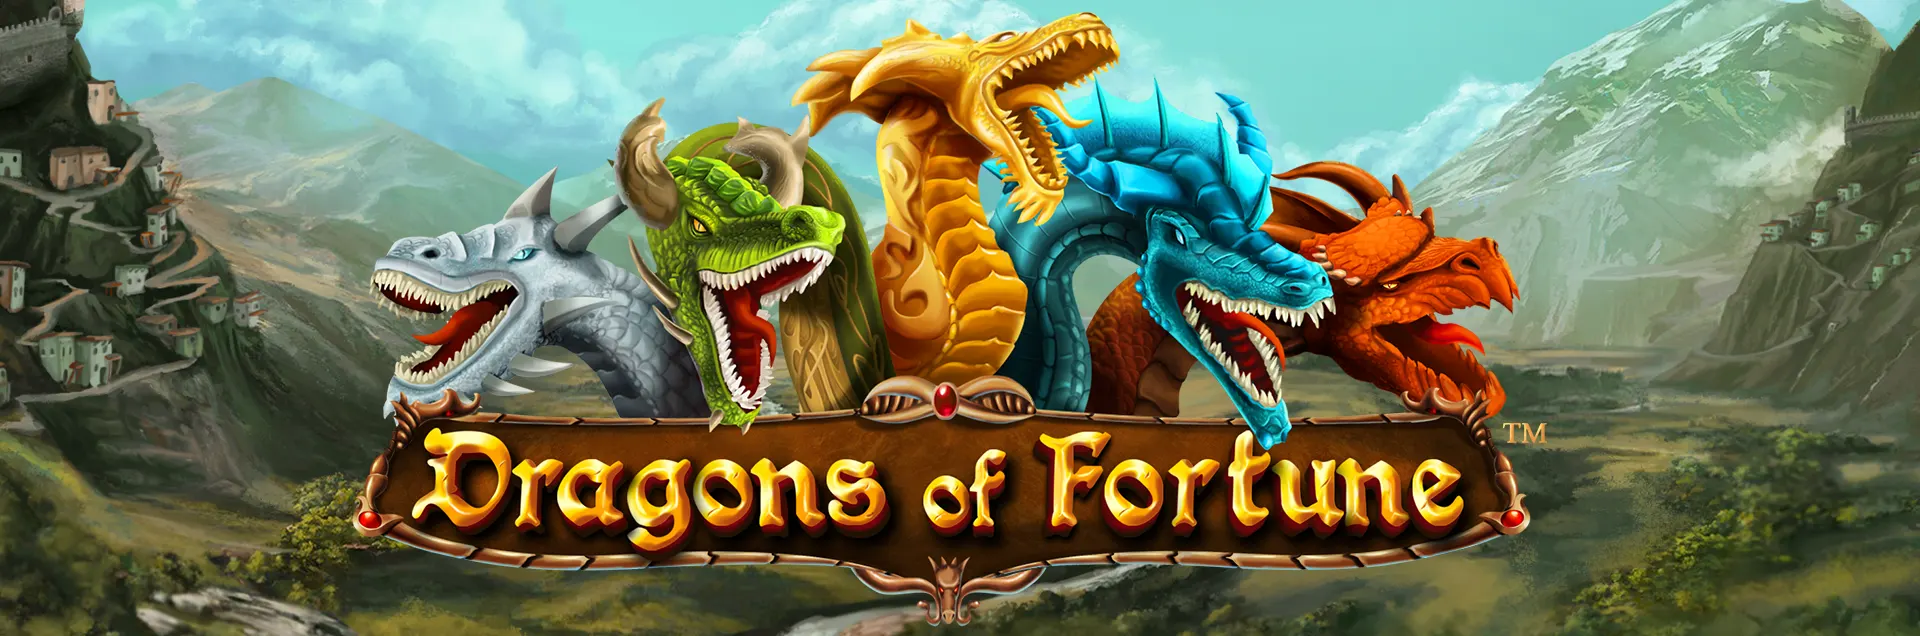 dragons of fortune